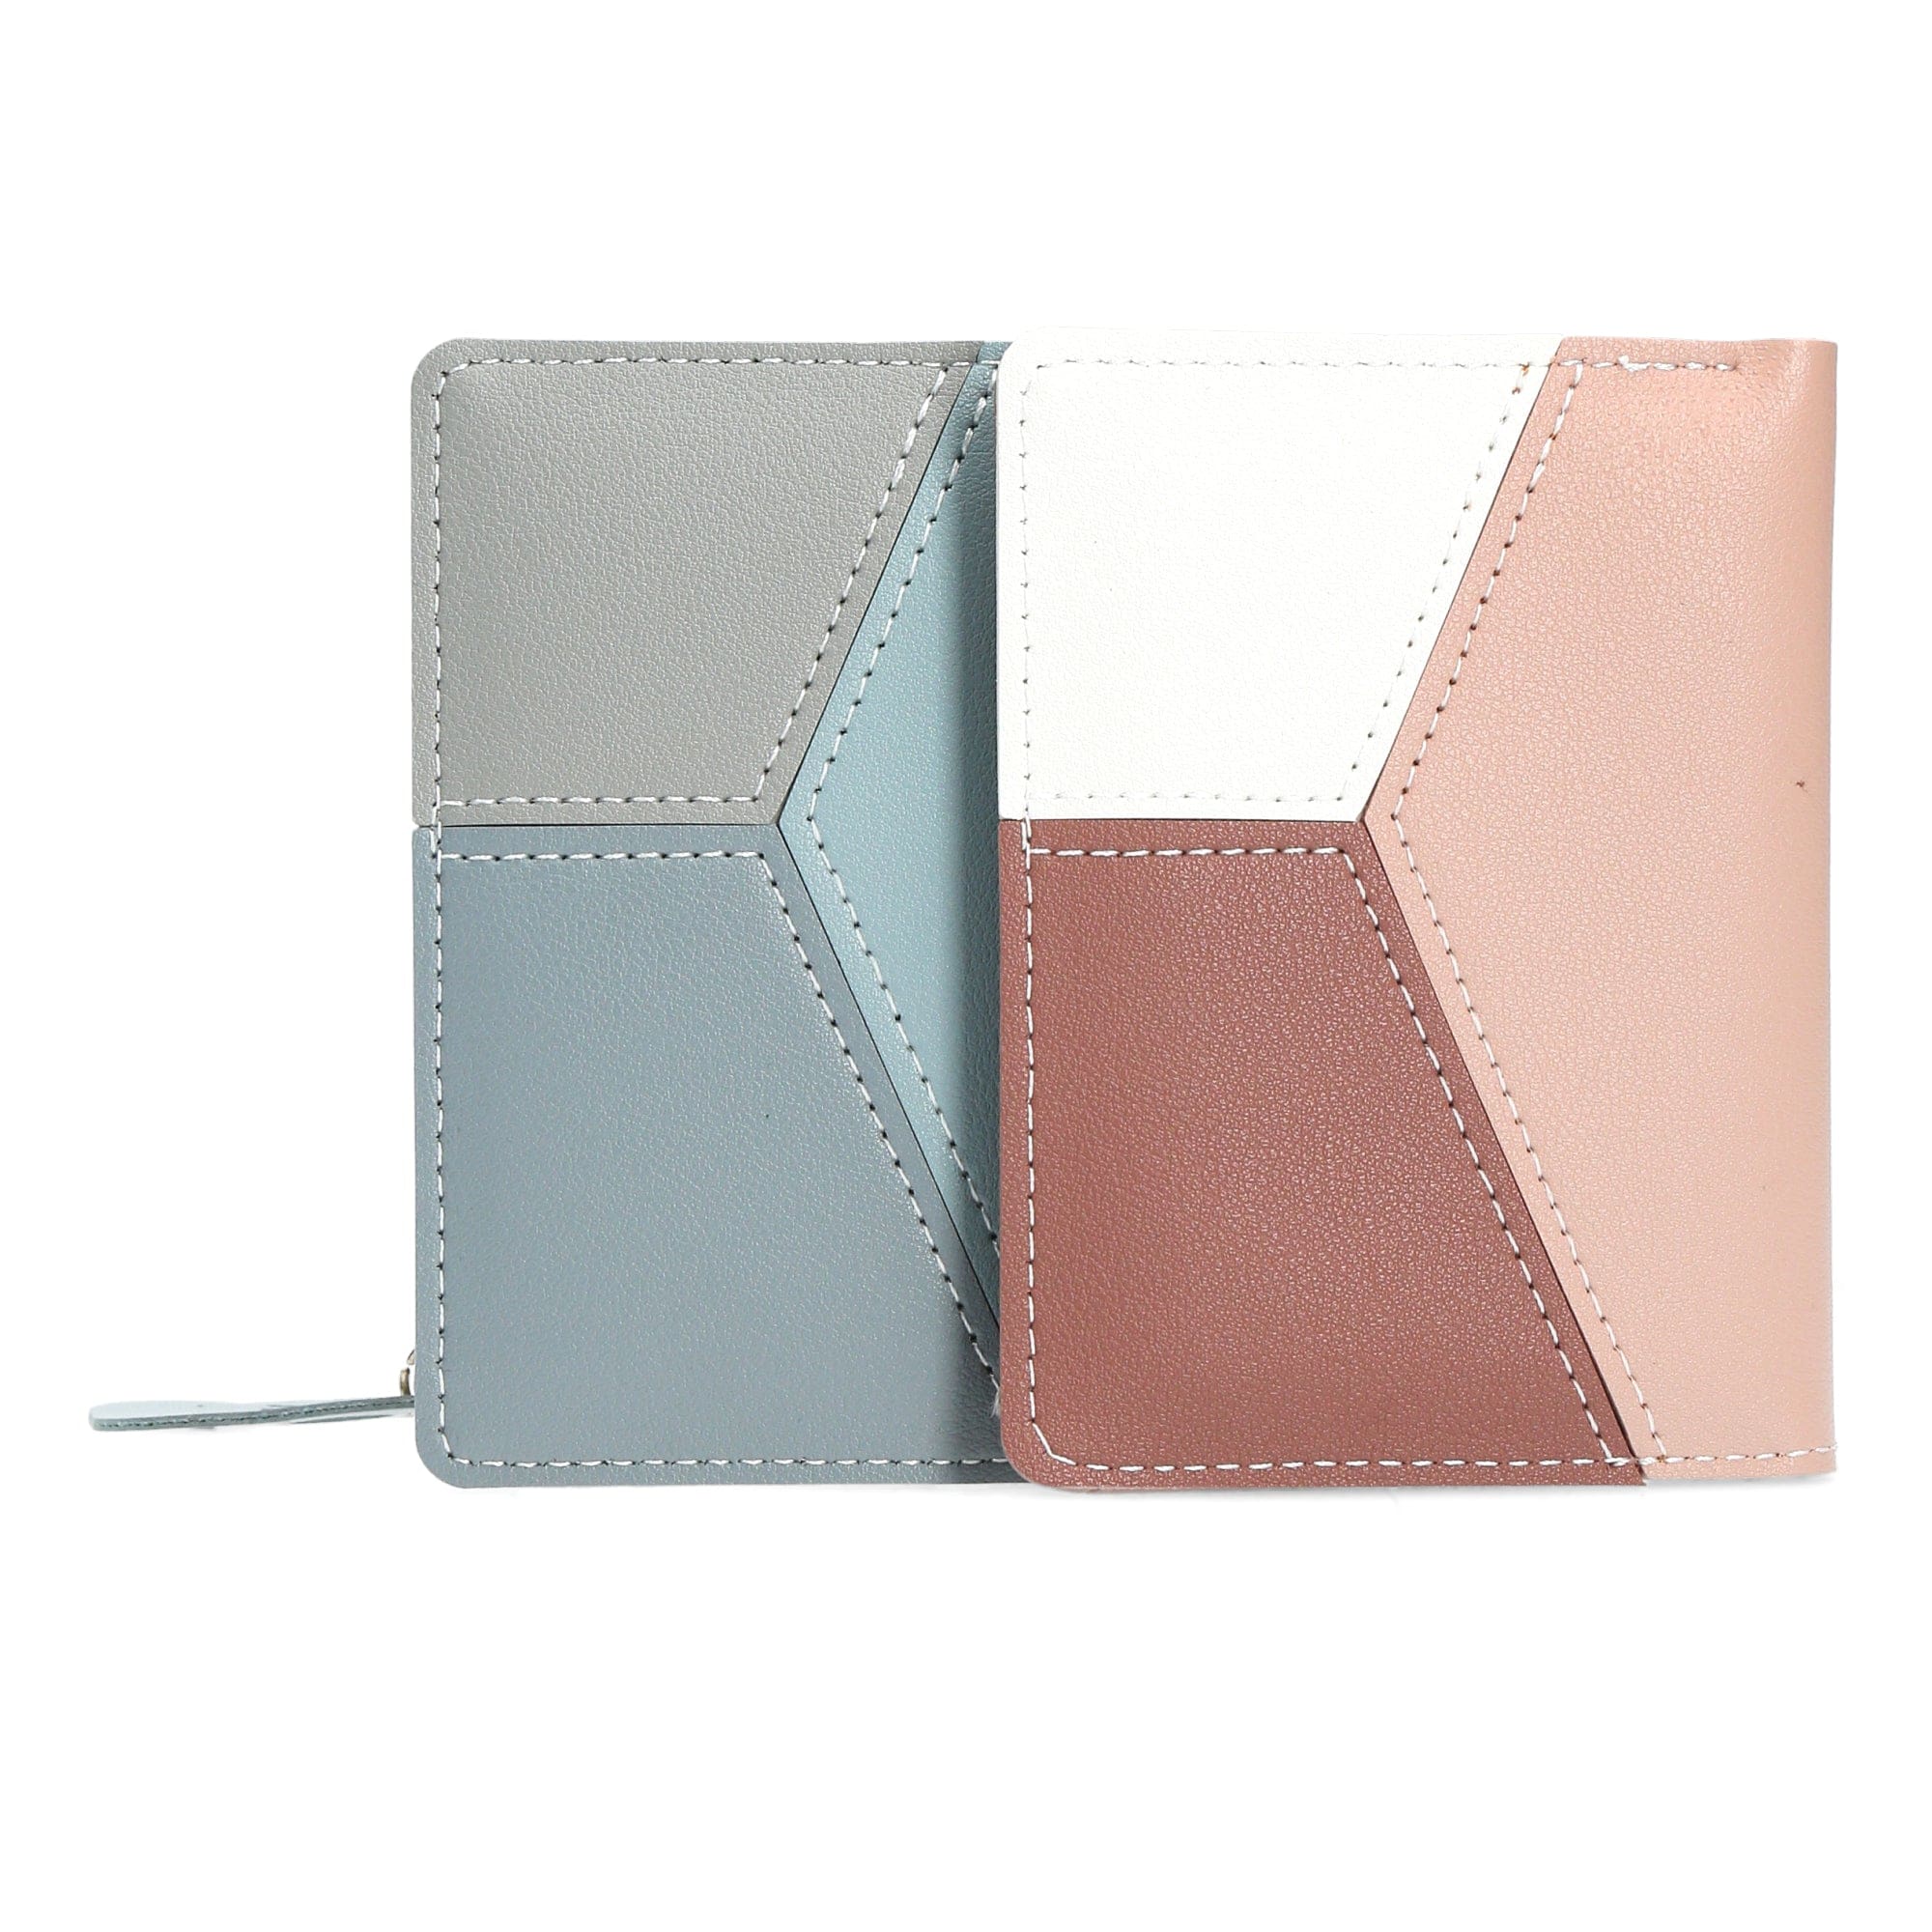 Montmartre card case - Small leather goods